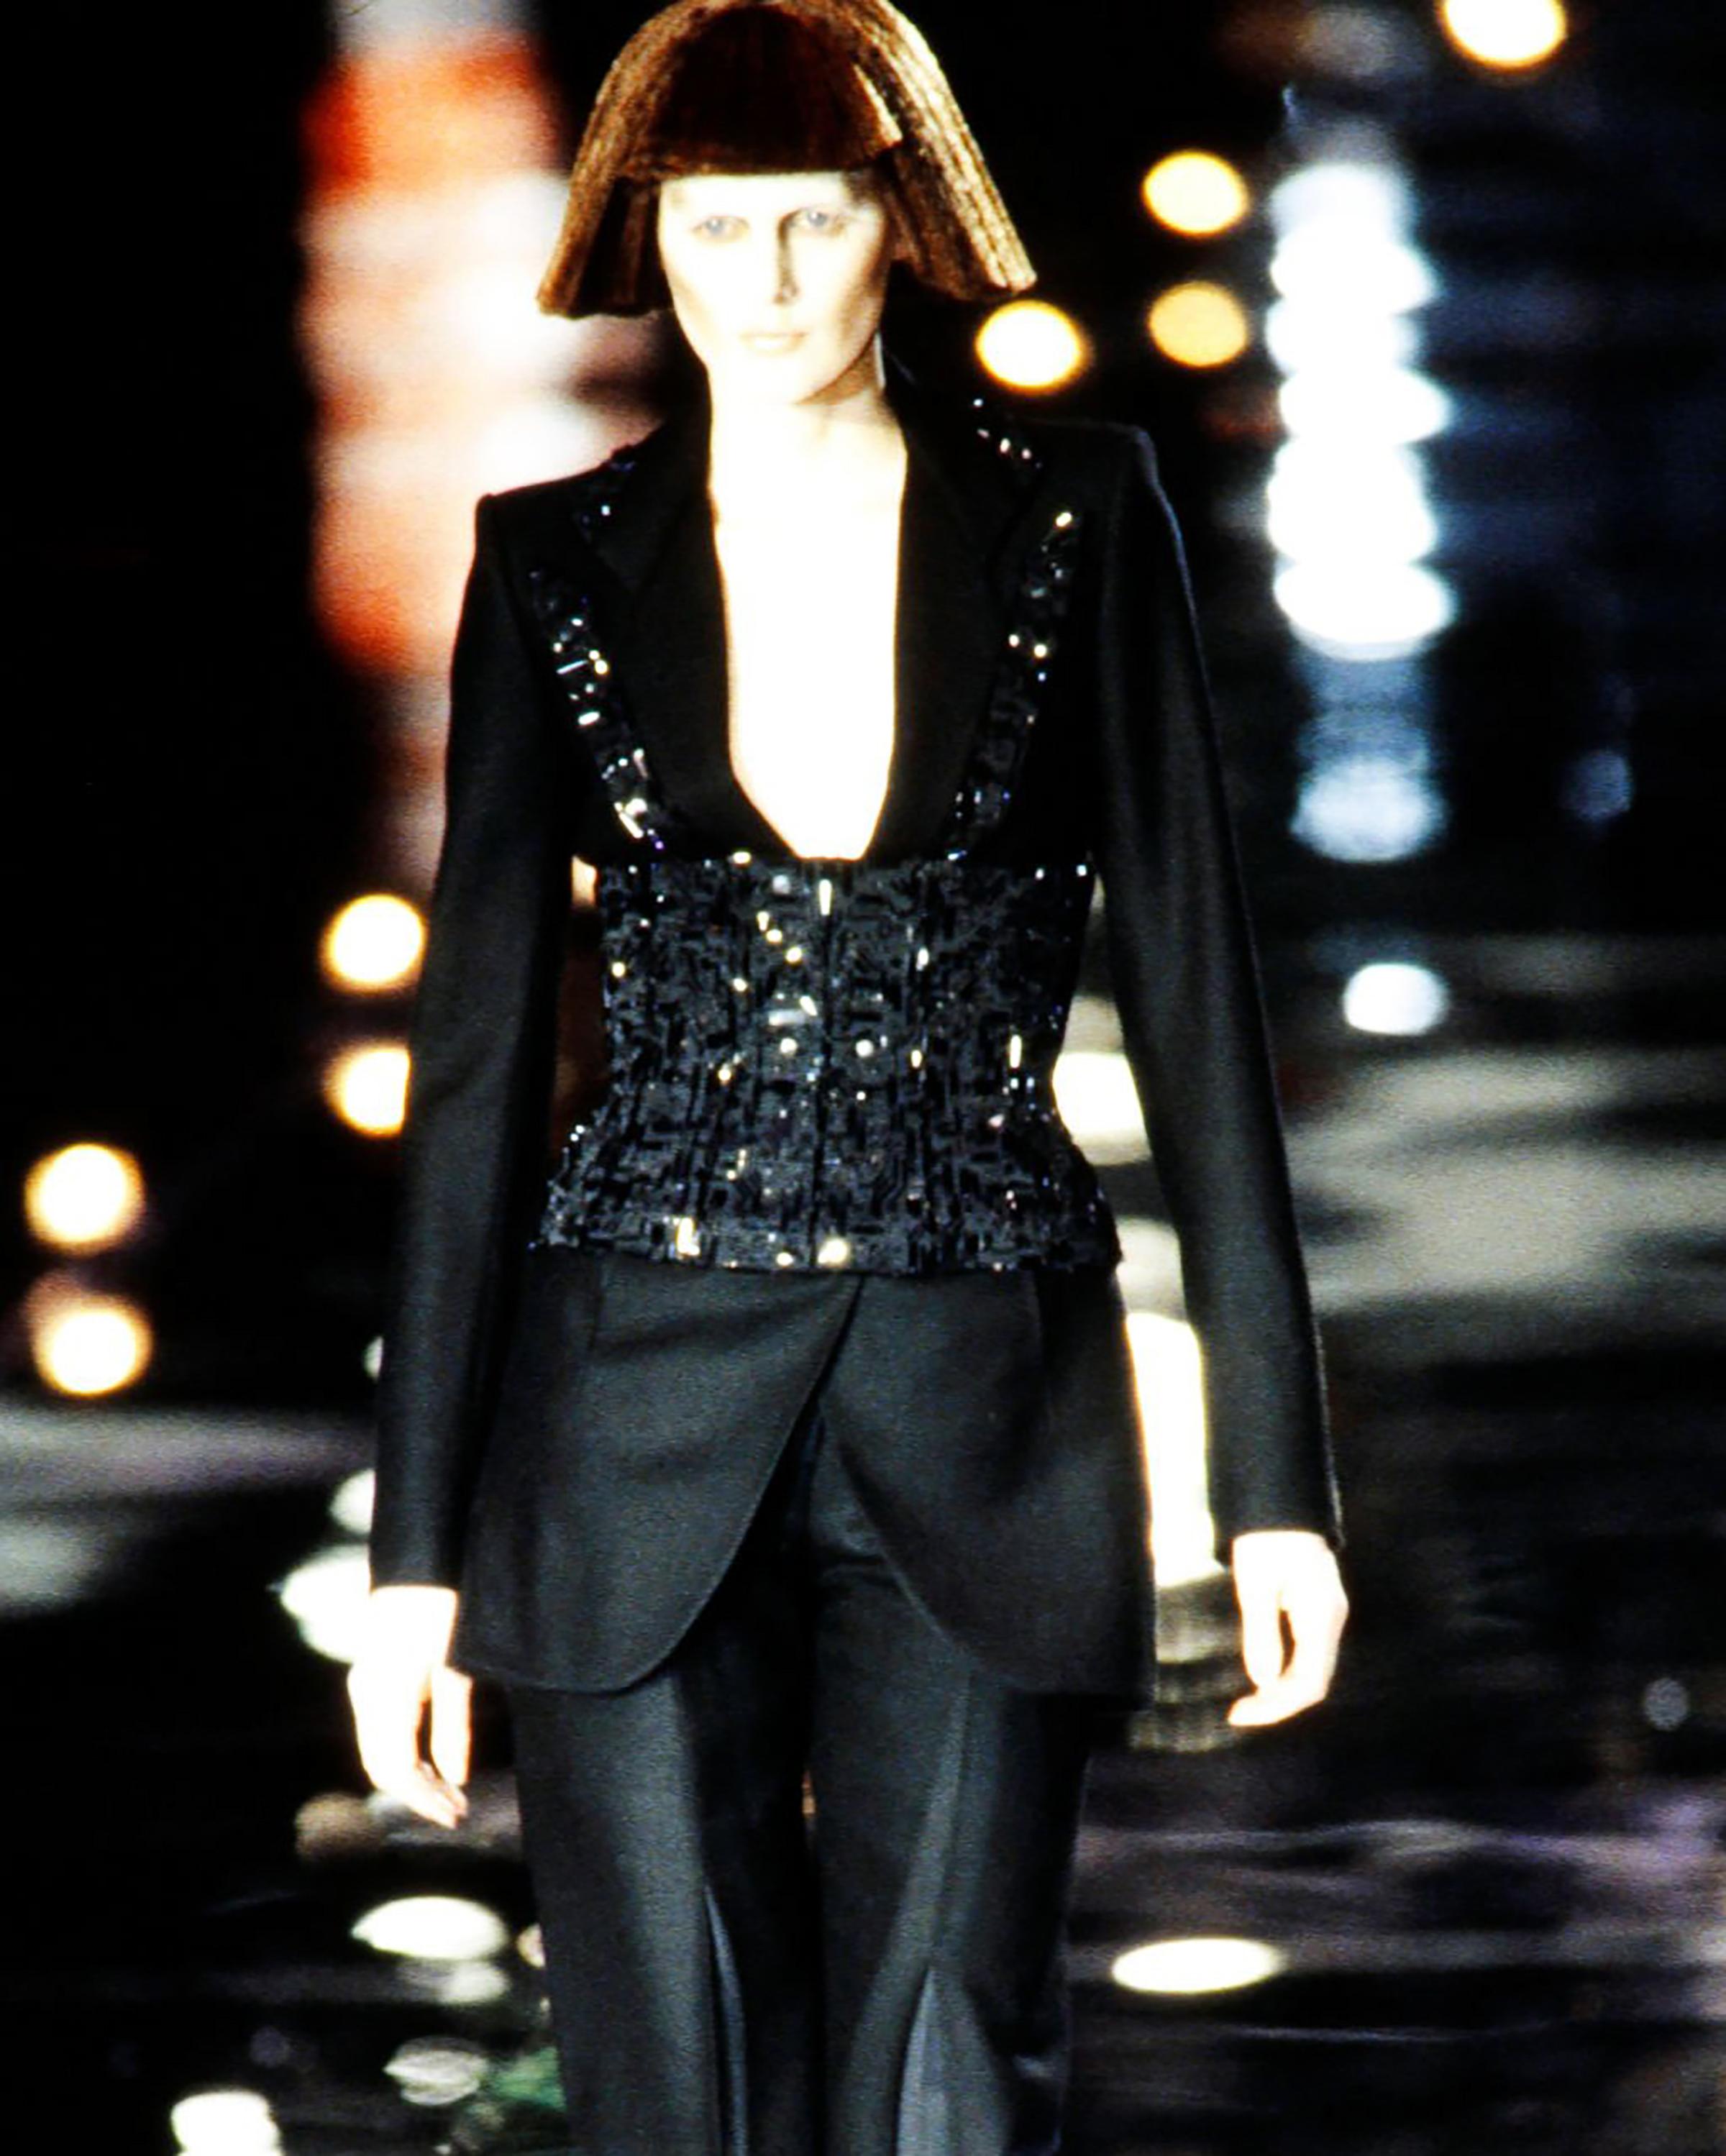 A/W 1999 Givenchy by Alexander McQueen circuit board motif black embellished waist corset / belt. Geometric silver-white beading and paillettes creates illusion of cybernetic computer circuit board. Features built-in semi-flexible boning and back